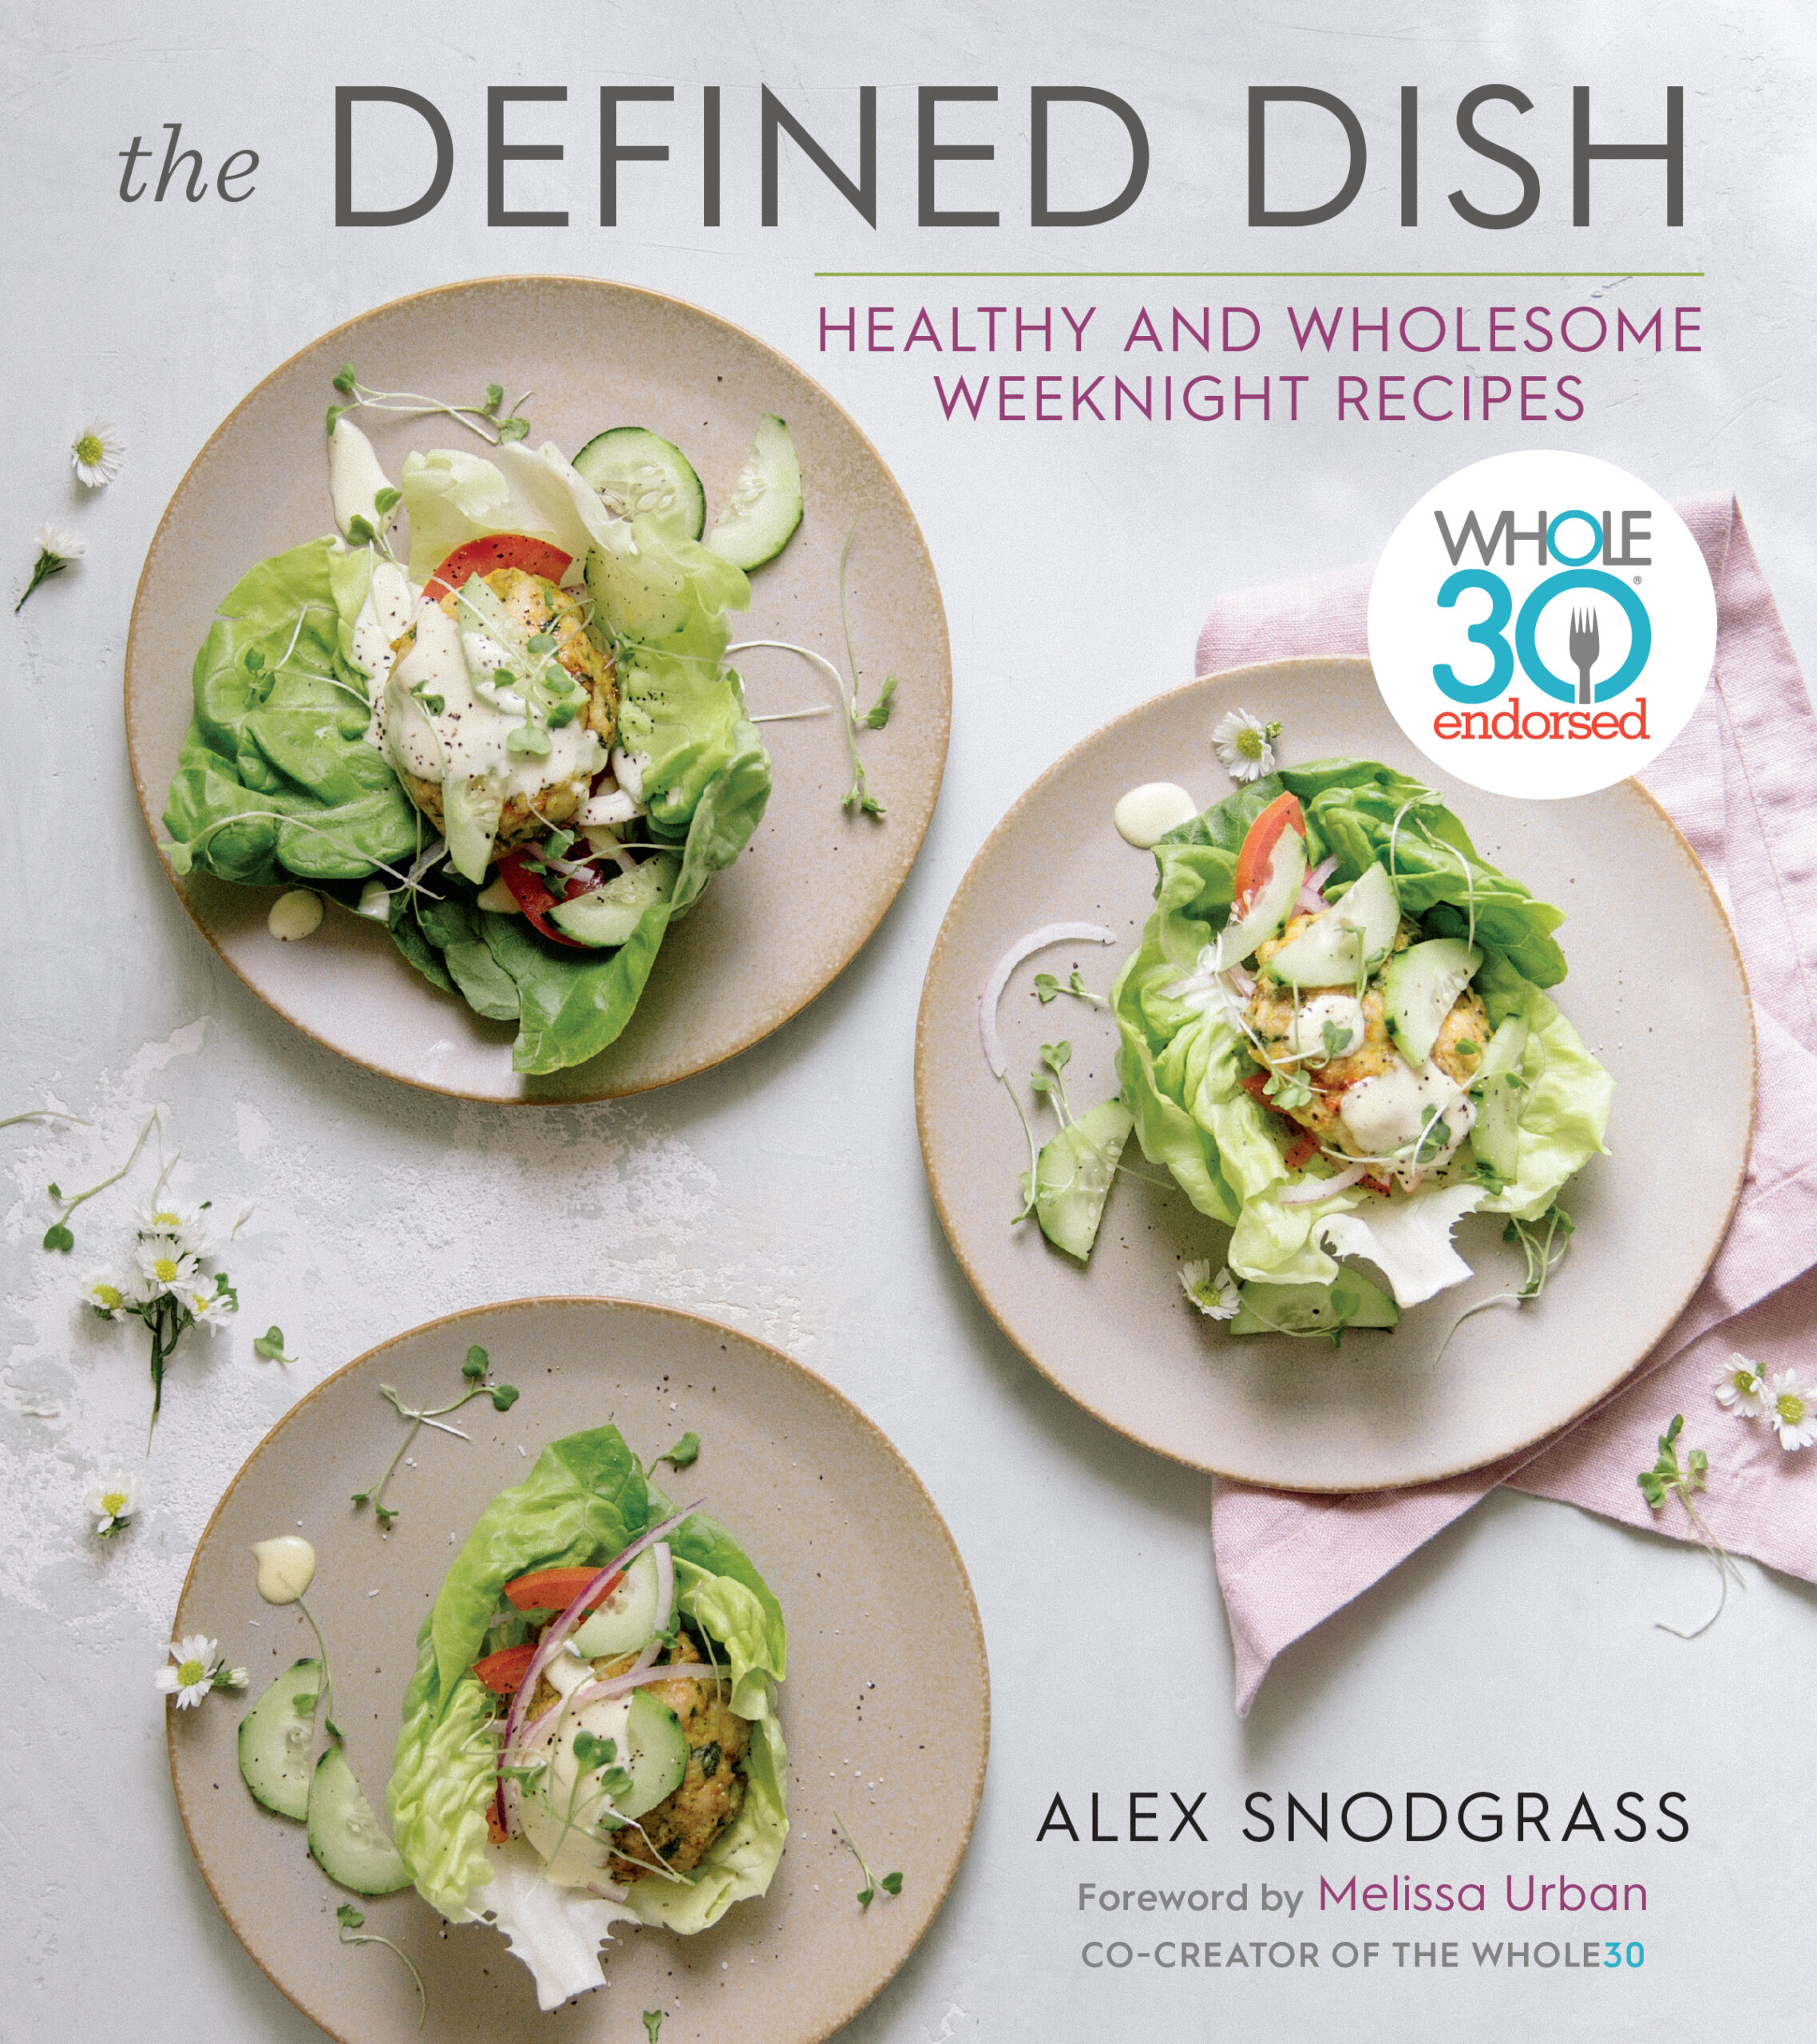 The Defined Dish by Alex Snodgrass